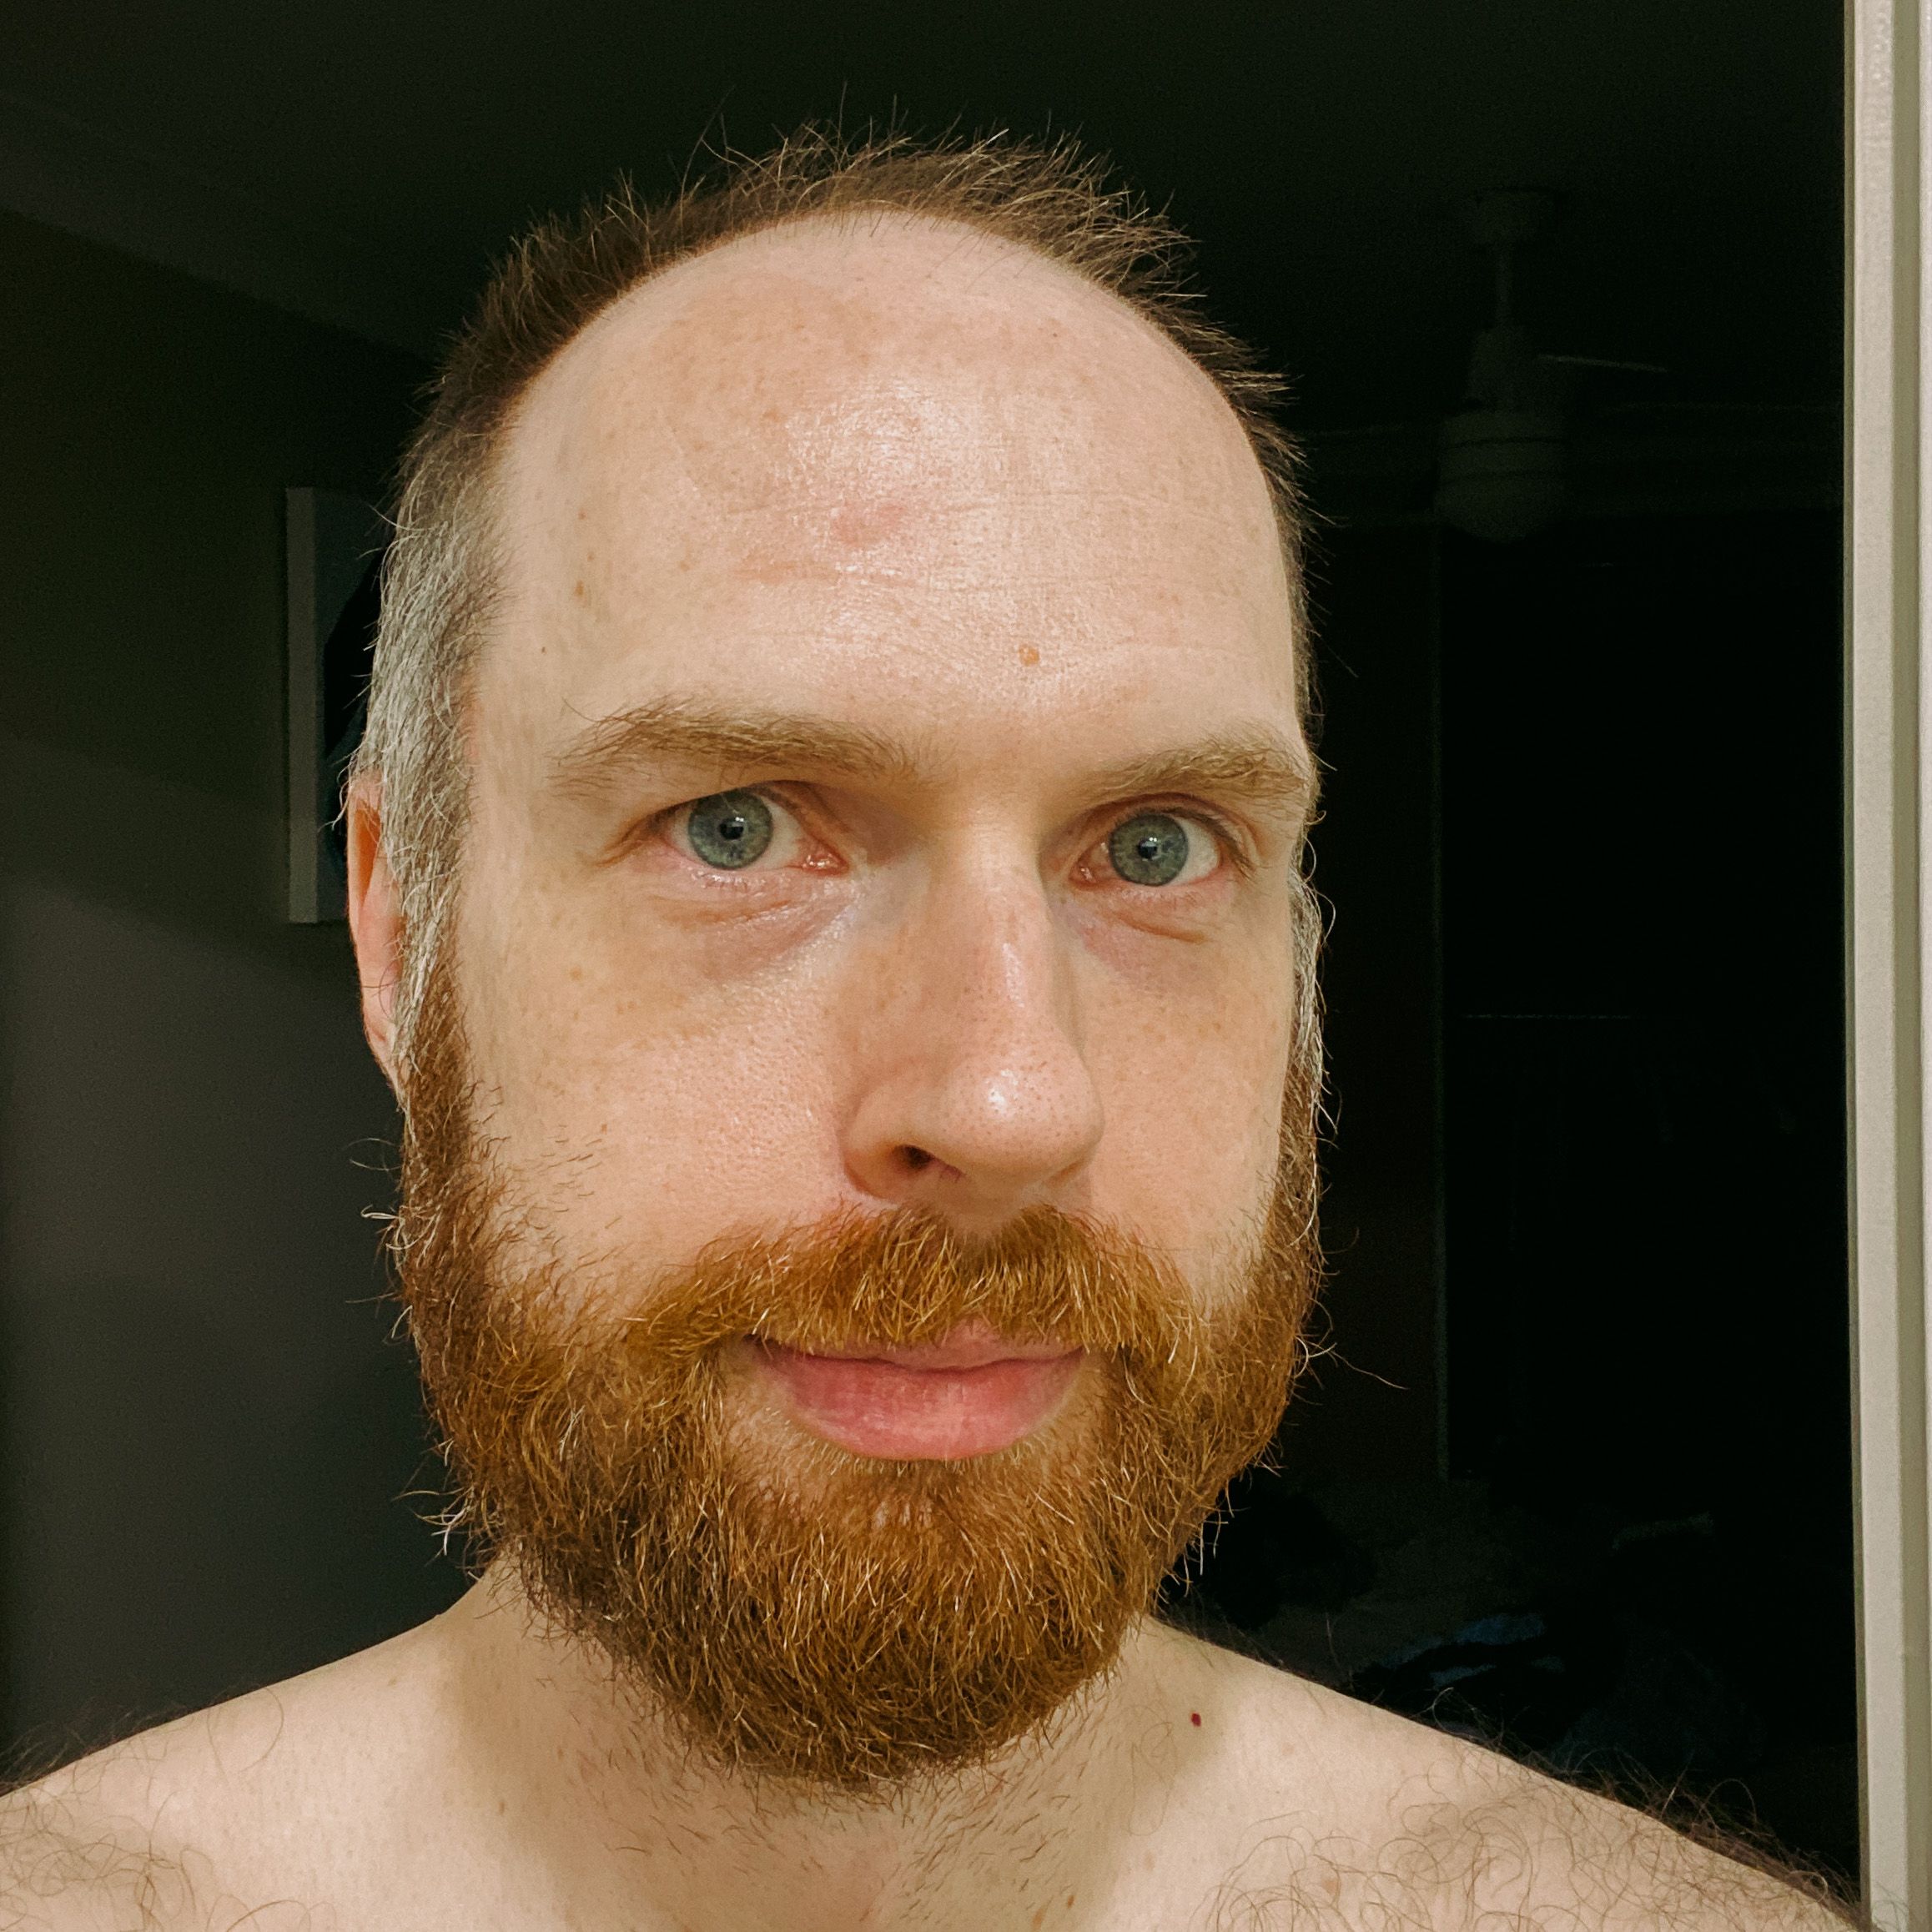 A photo of me, a white man with blue eyes and a, uh, let's call it a "large" forehead, with a very fluffy and scruffy-looking full red beard and brown hair that's probably about a centimetre or so long.